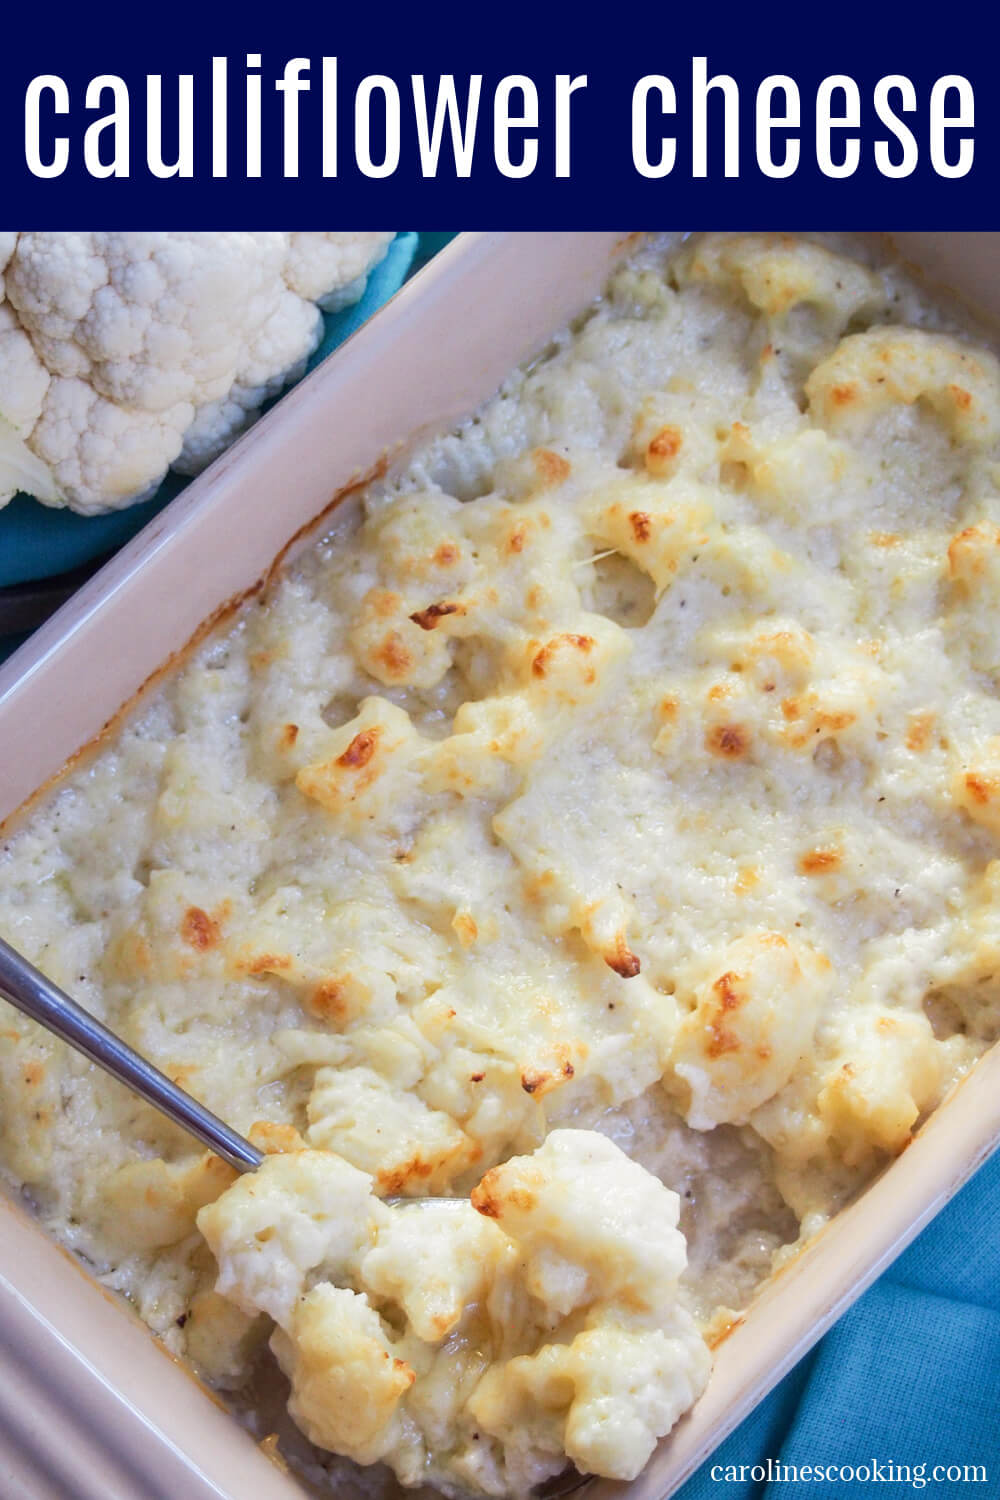 Cauliflower cheese is a classic British side dish that pairs perfectly with a roast, but also with a range of other dishes. It's easy, tasty and wonderfully comforting.